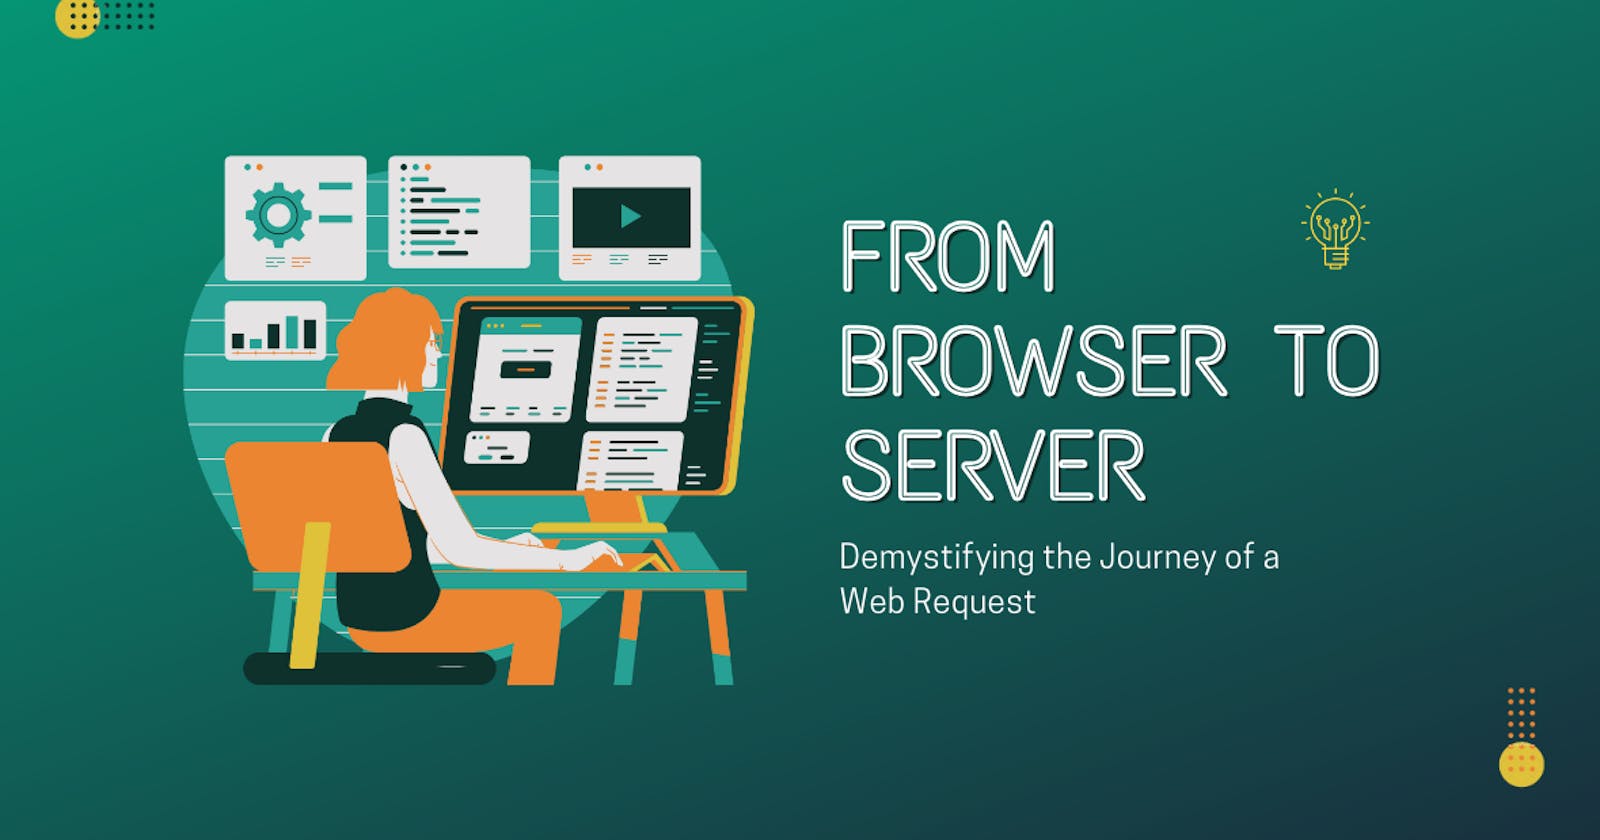 Demystifying the Journey of a Web Request: From Browser to Server